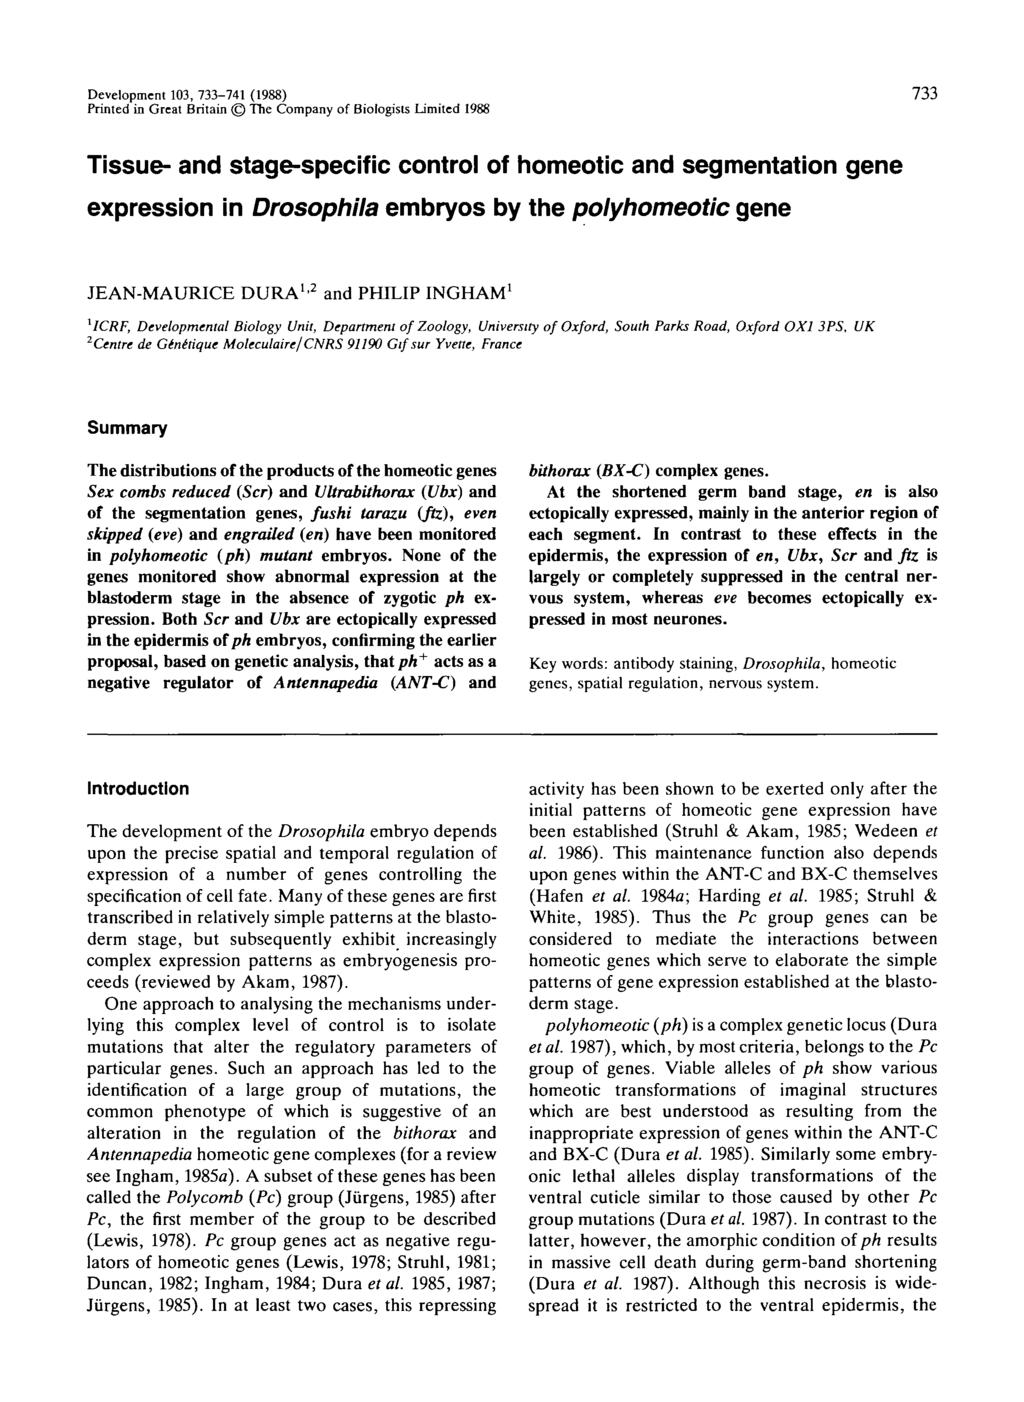 Development 103, 733-741 (1988) Printed in Great Britain The Company of Biologists Limited 1988 733 Tissue- and stage-specific control of homeotic and segmentation gene expression in Drosophila